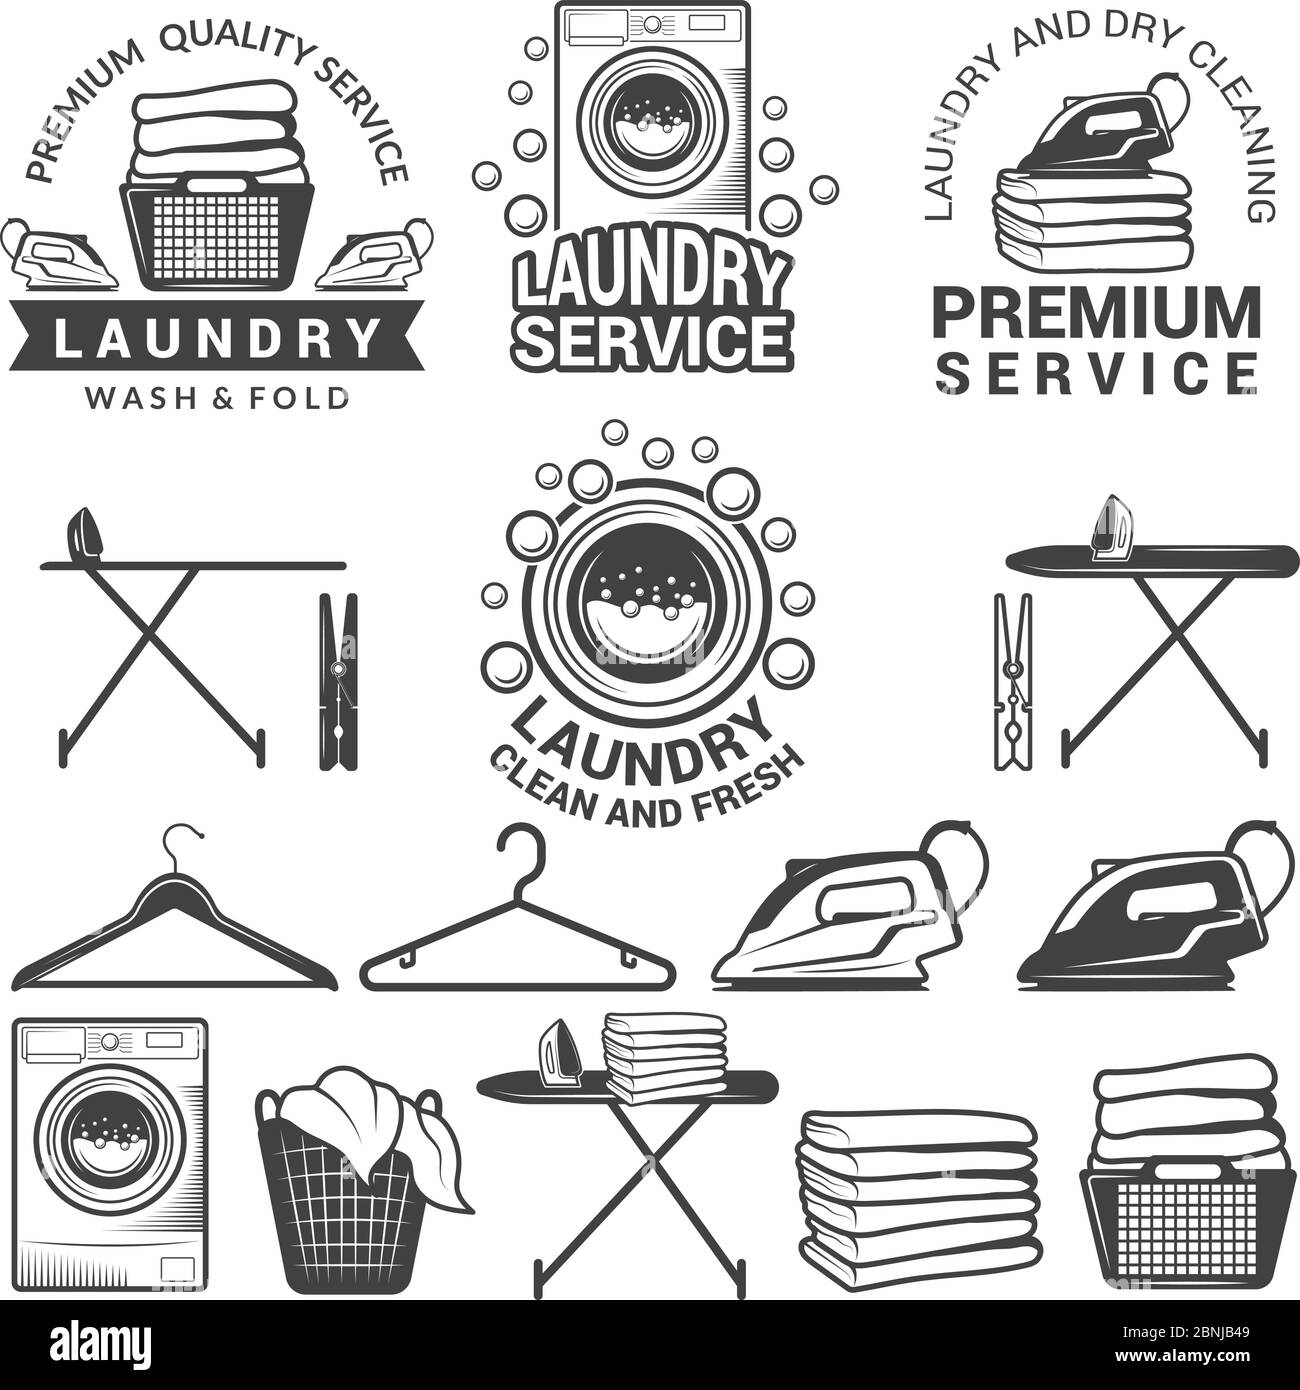 Monochrome labels of laundry service. Illustrations of washing machines Stock Vector